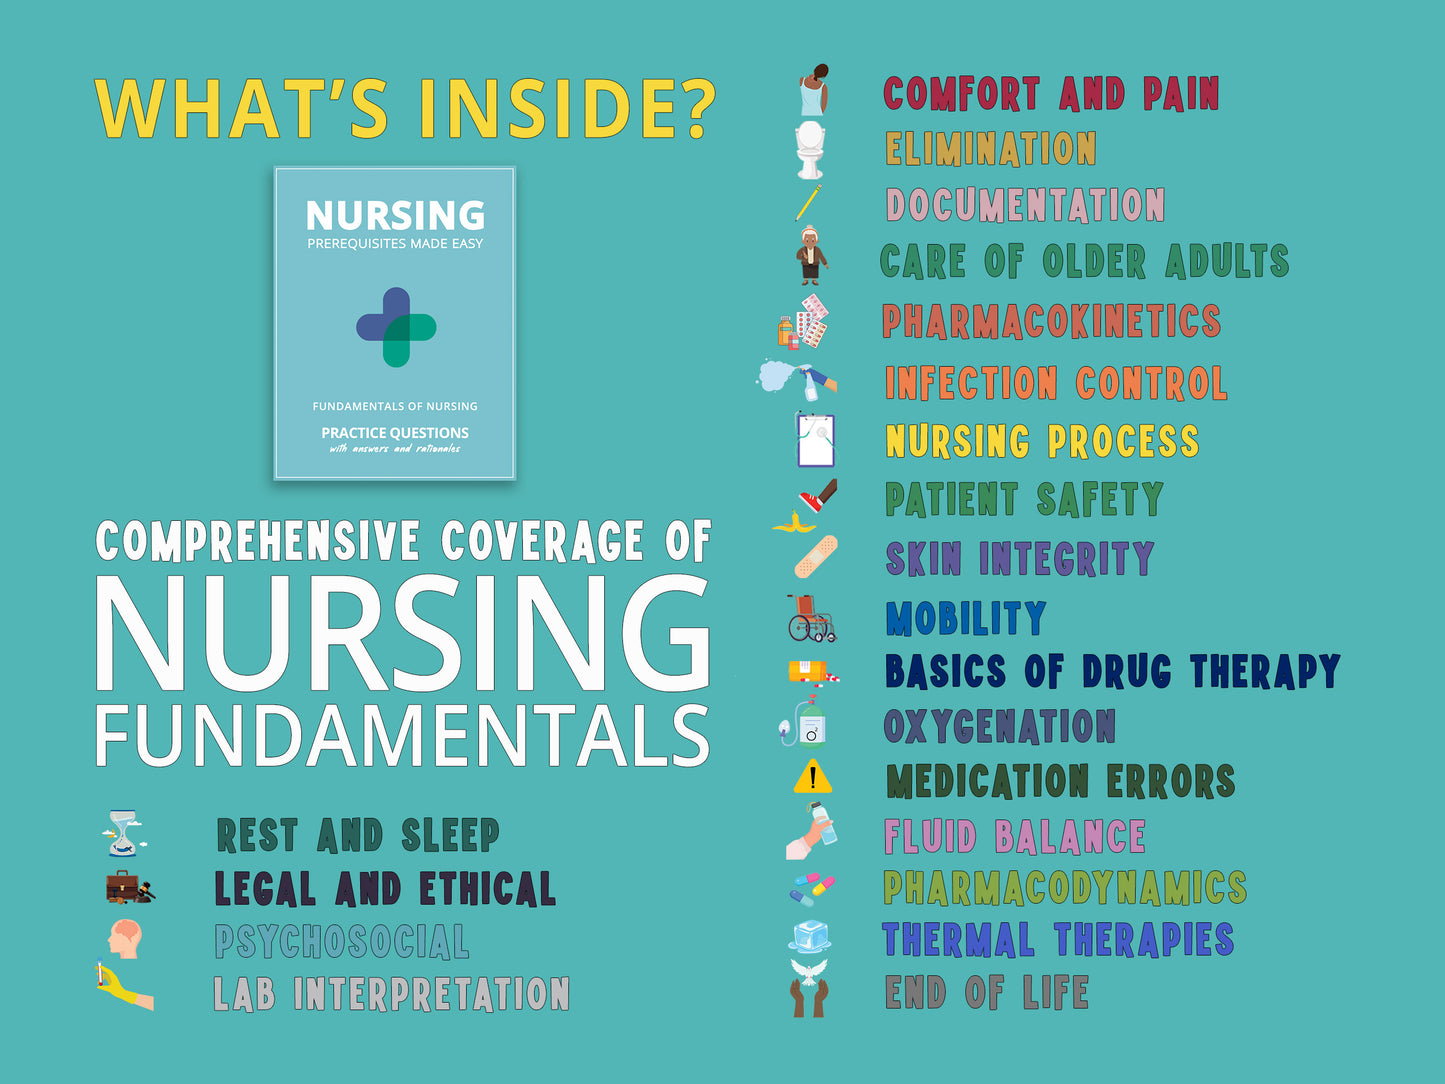 Fundamentals of Nursing Study Guide book displayed with the table of contents, listing each chapter name. Comprehensive study guide with detailed chapters covering essential nursing concepts, practice questions, and study aids for nursing students.